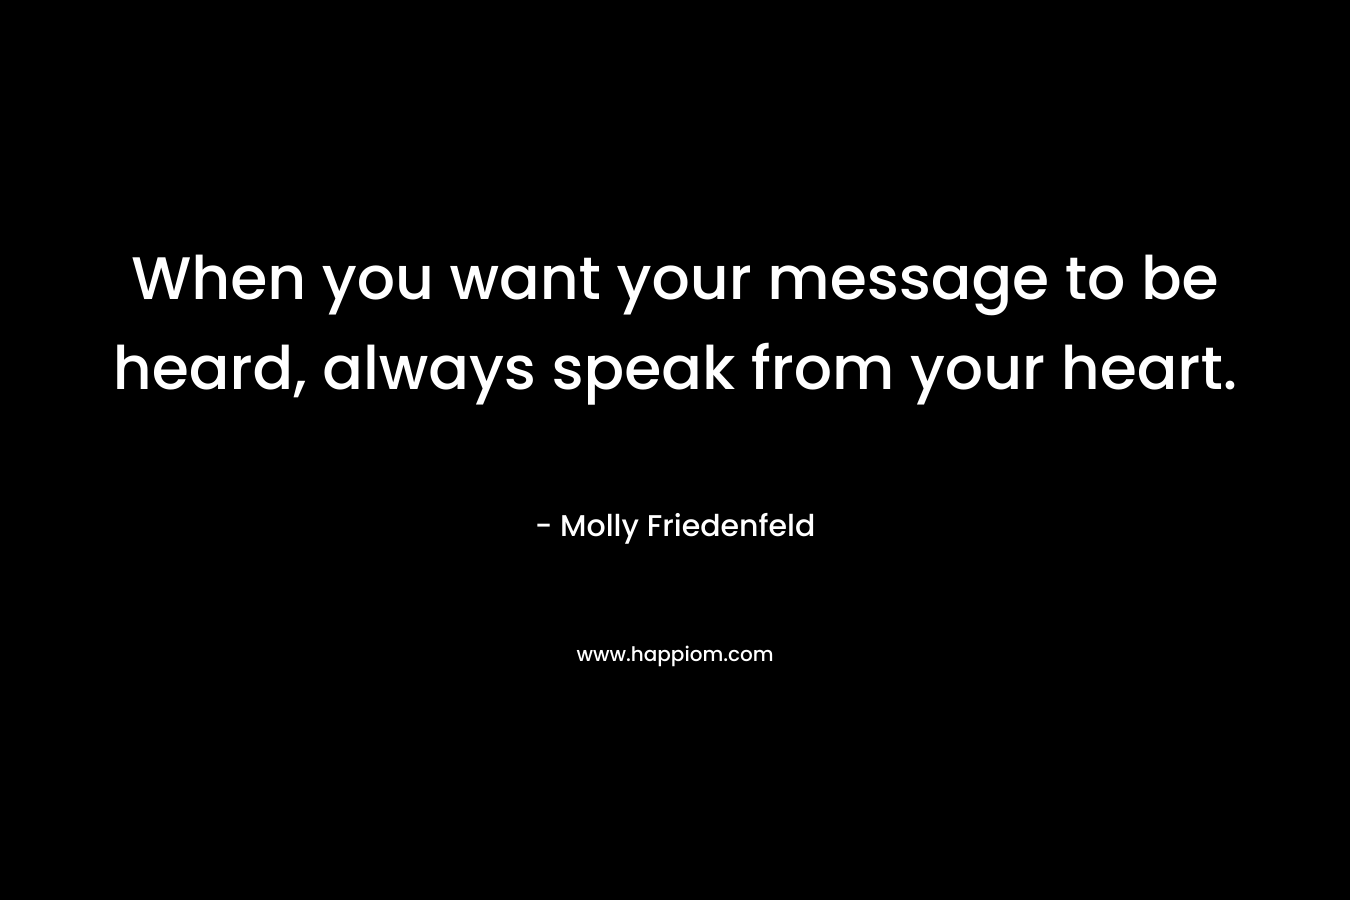 When you want your message to be heard, always speak from your heart.